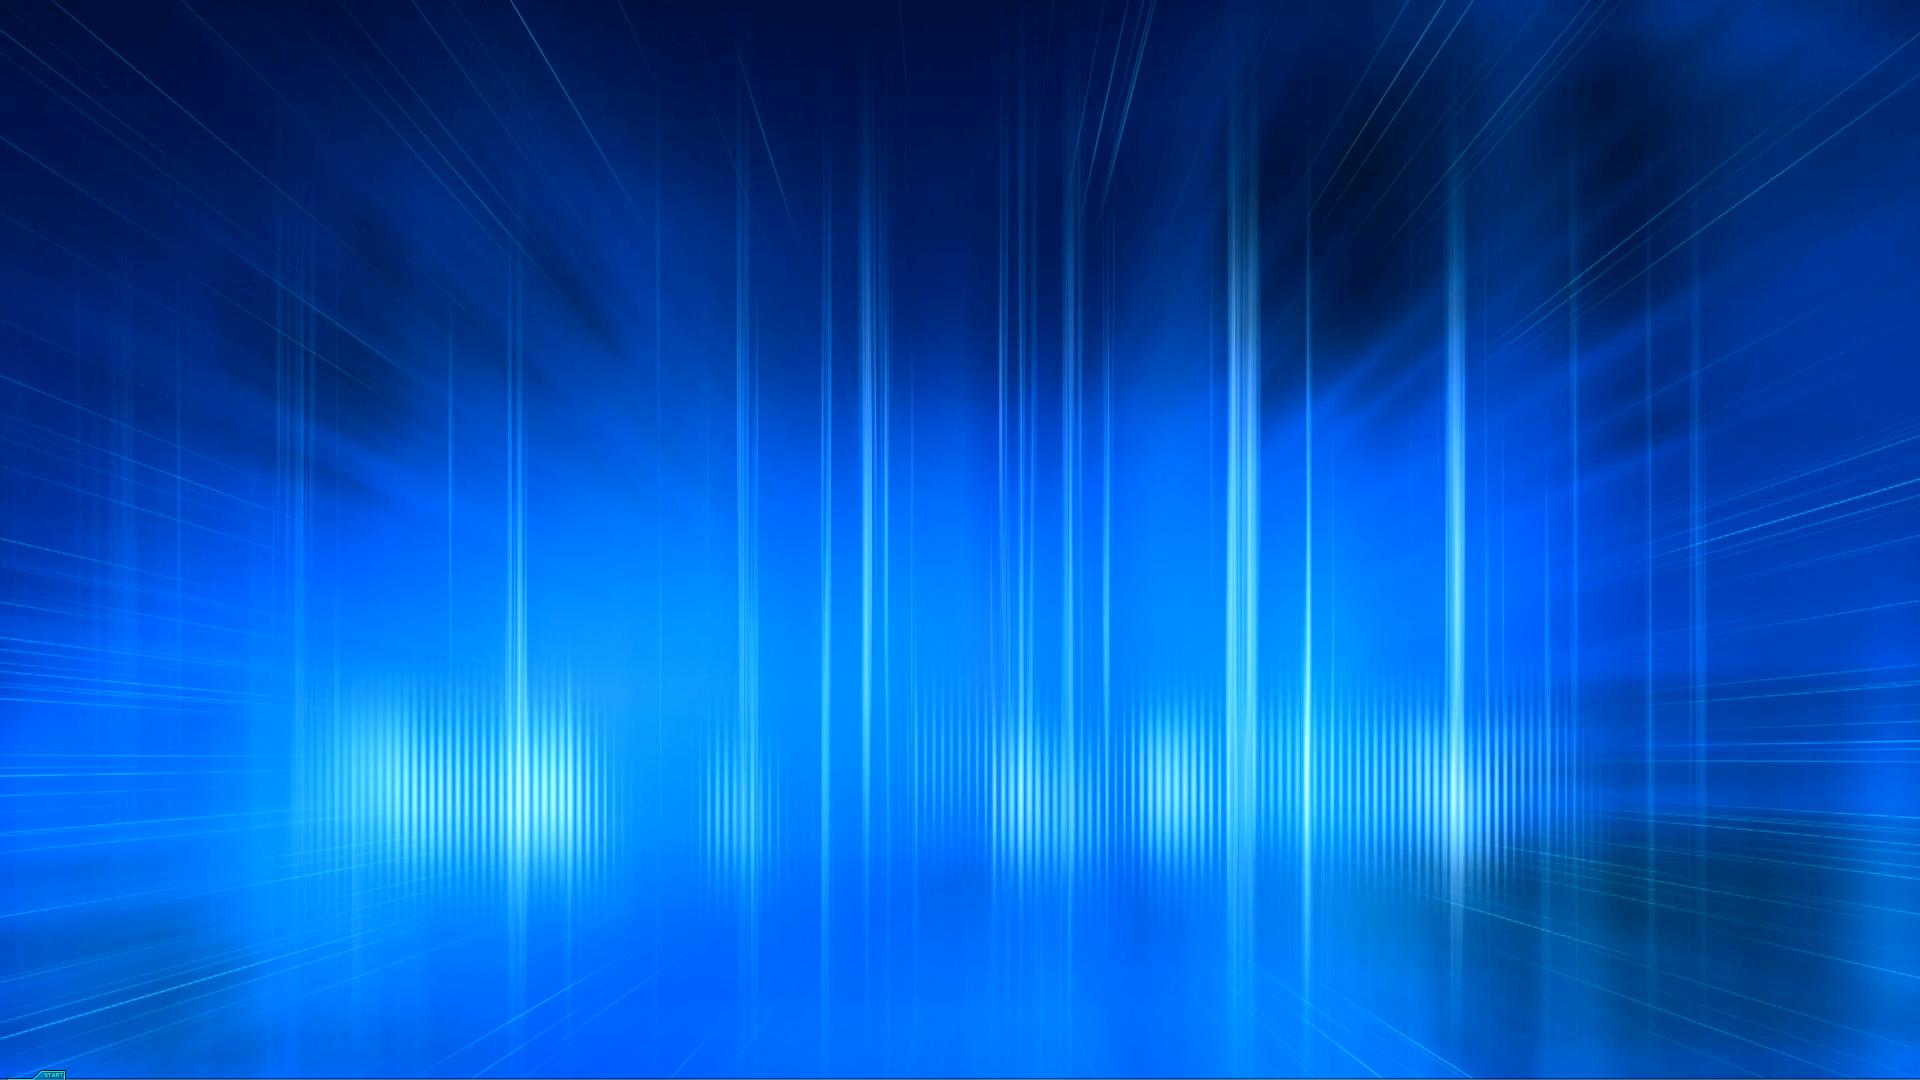 Blue Hi Tech Abstract Background Vector